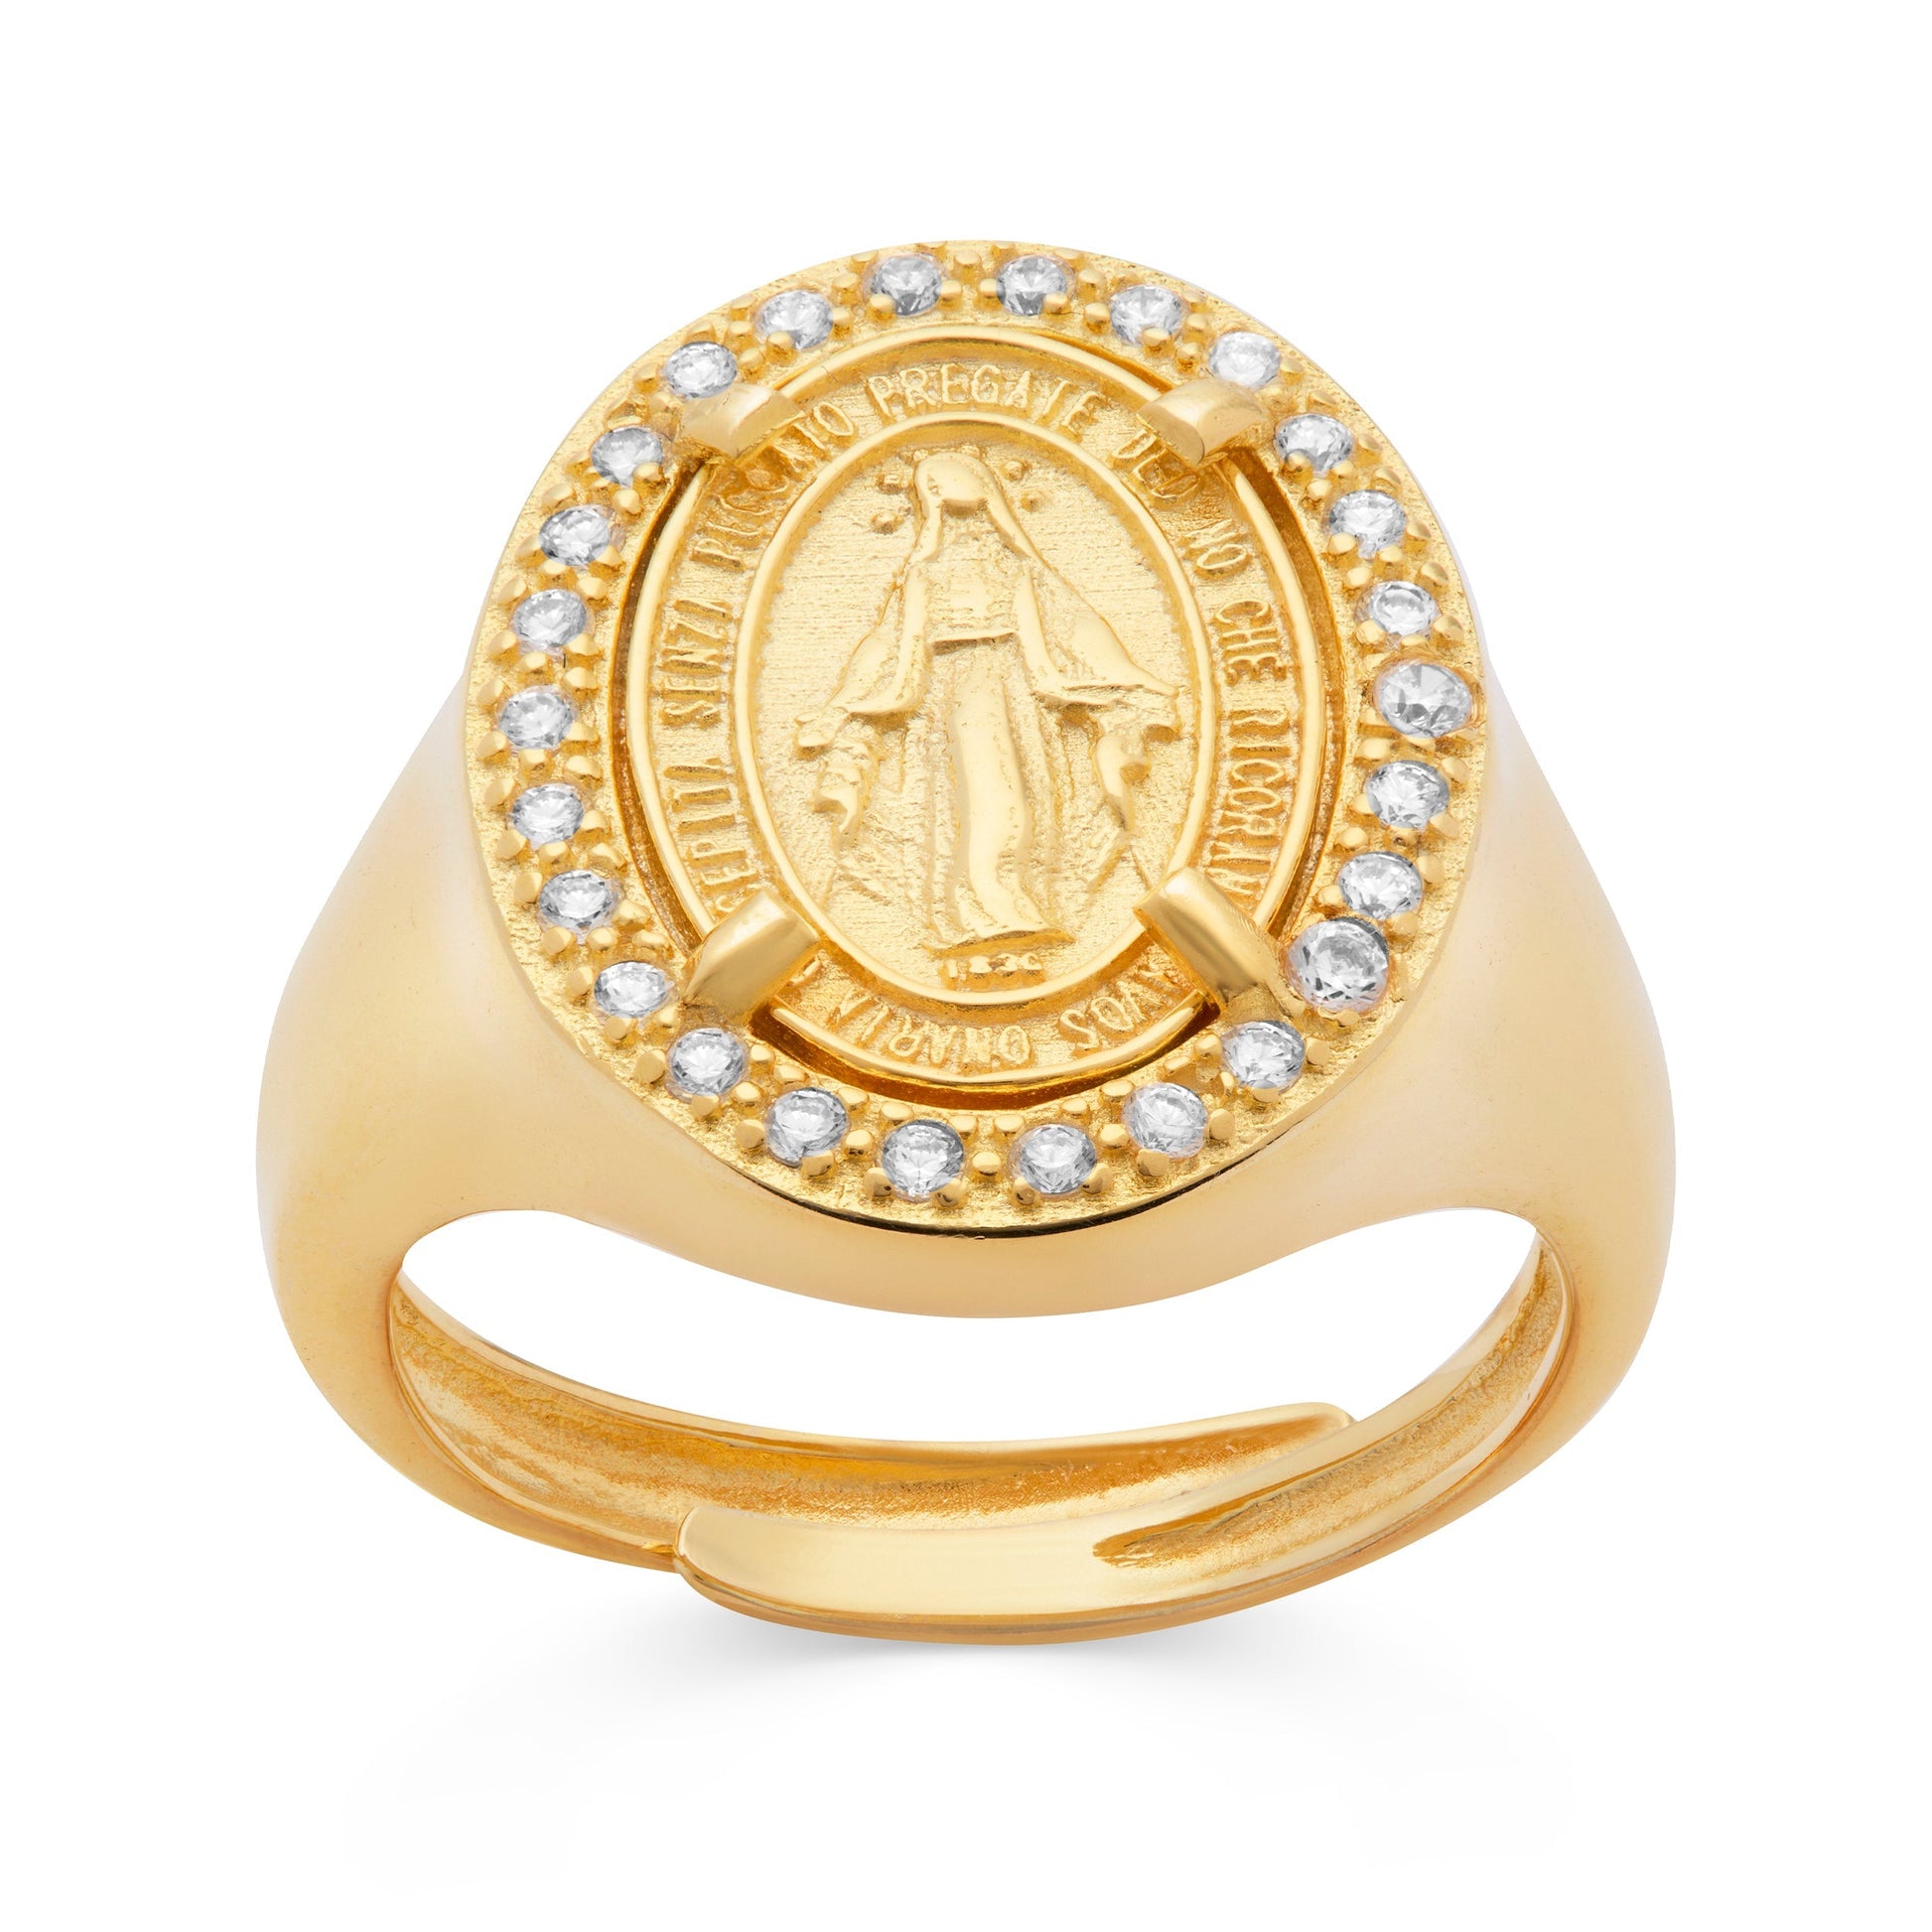 MONDO CATTOLICO Ring Adjustable Gold-plated Sterling Silver Adjustable Chevalier Ring With Miraculous Medal And Cubic Zirconia Details